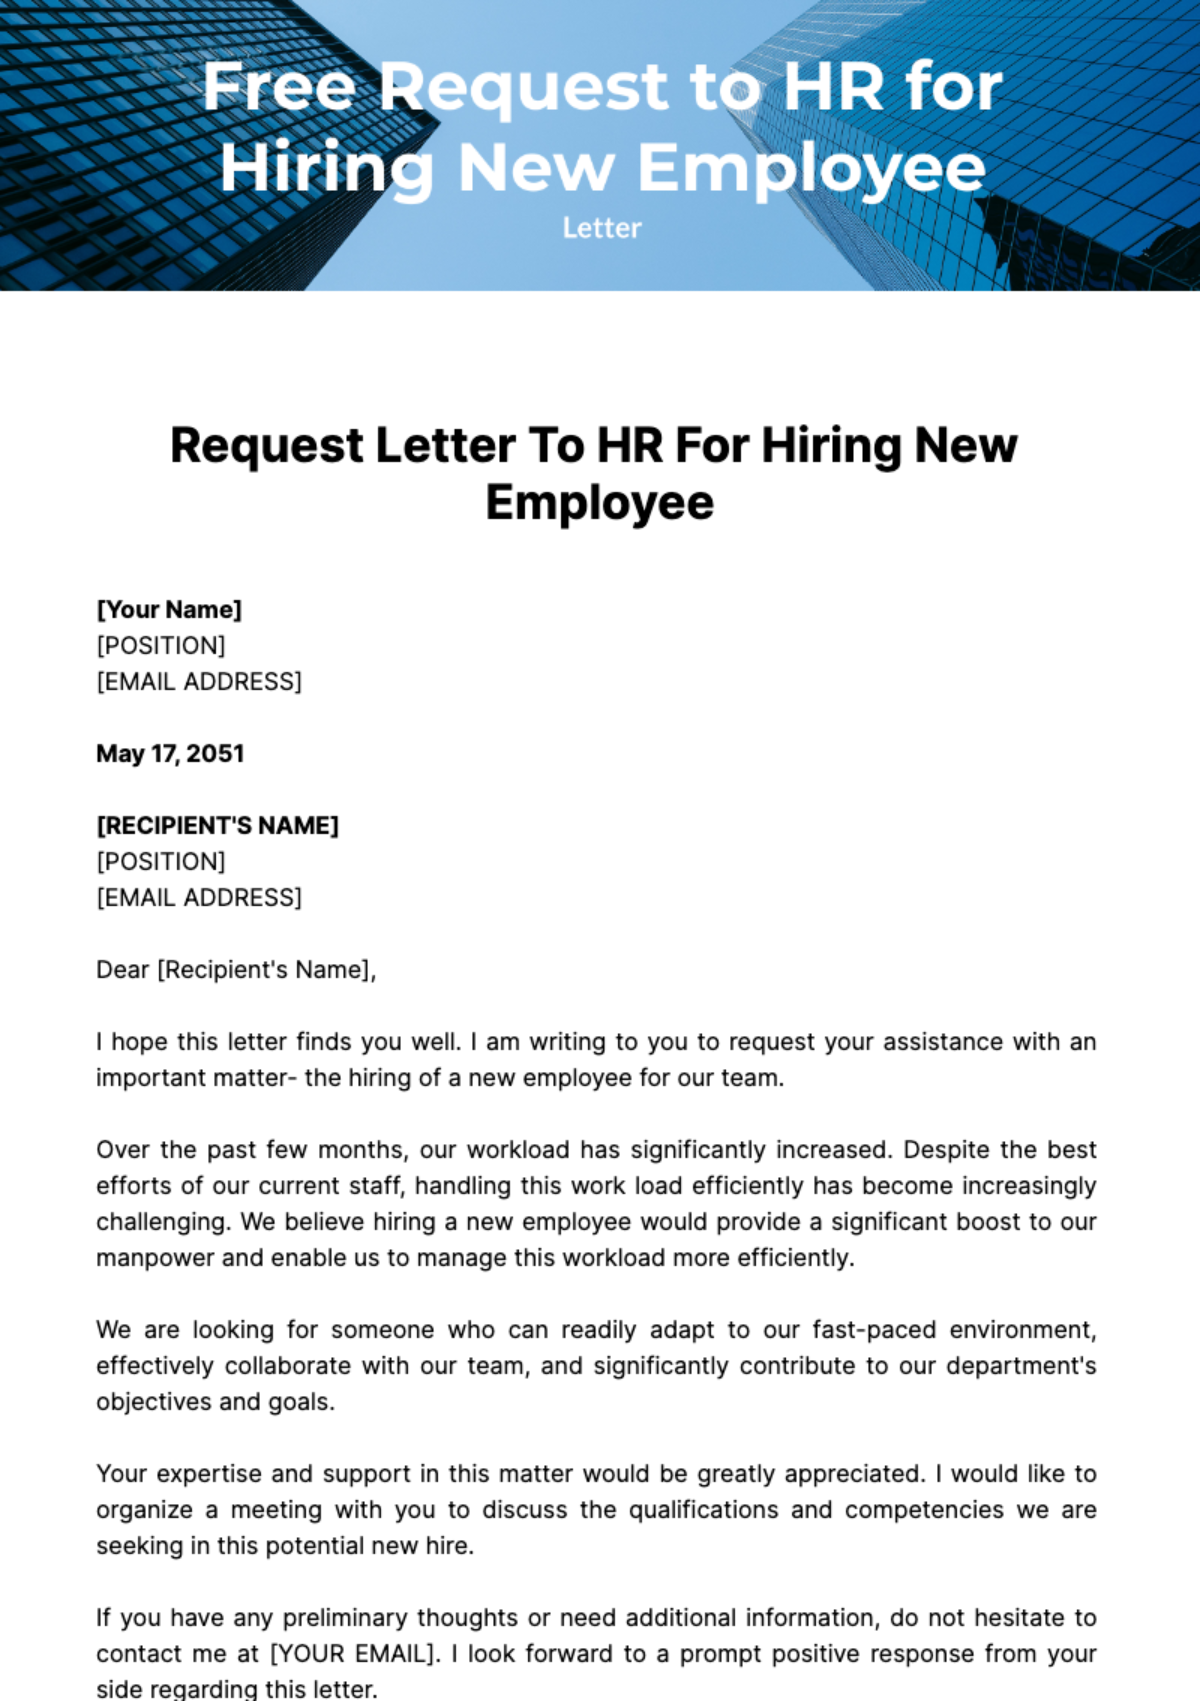 Free Request Letter to HR for Hiring New Employee Template